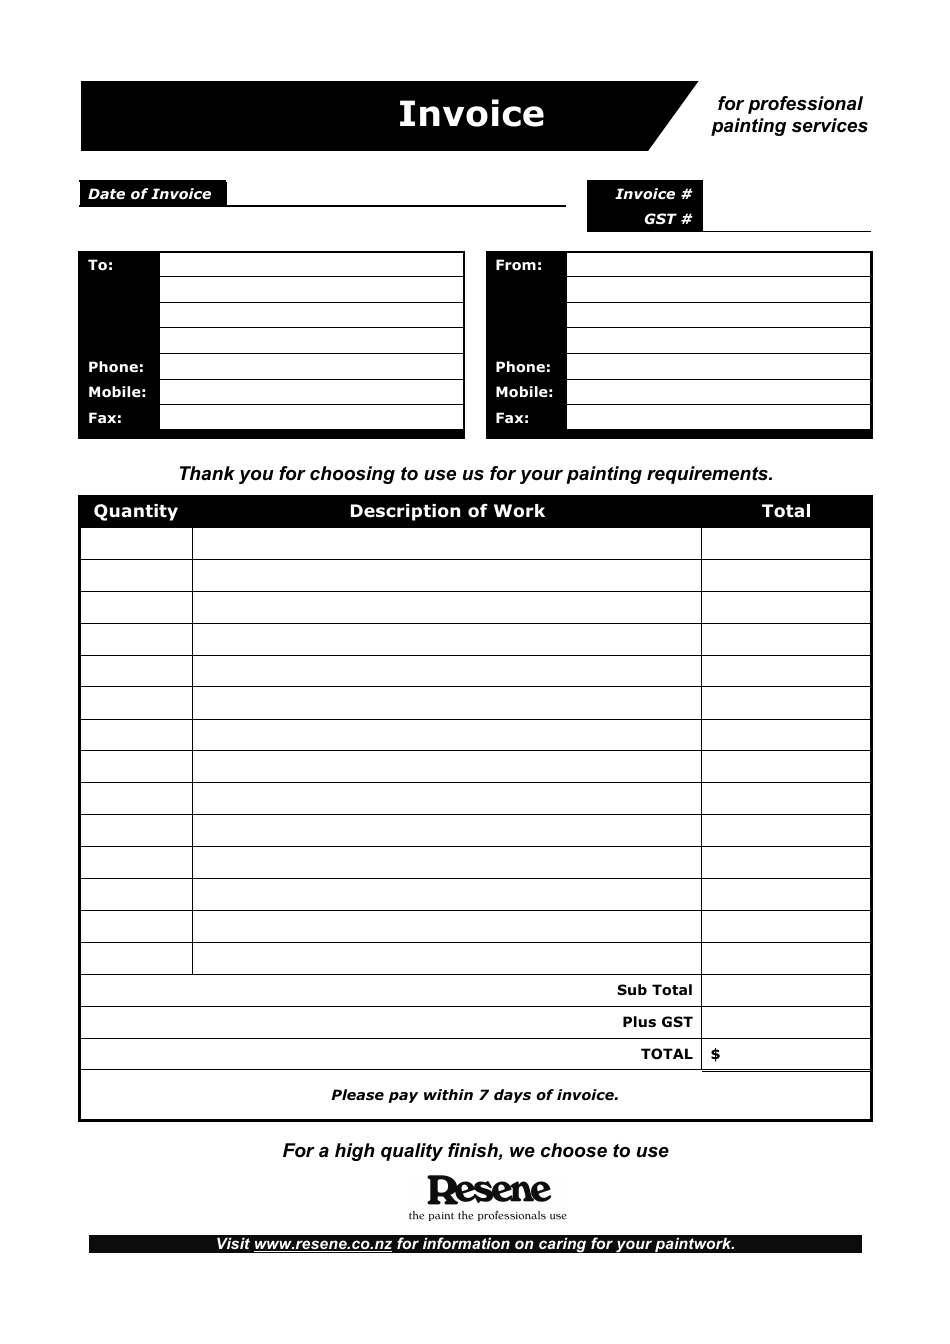 Professional Painting Services Invoice Template - Resene, Page 1